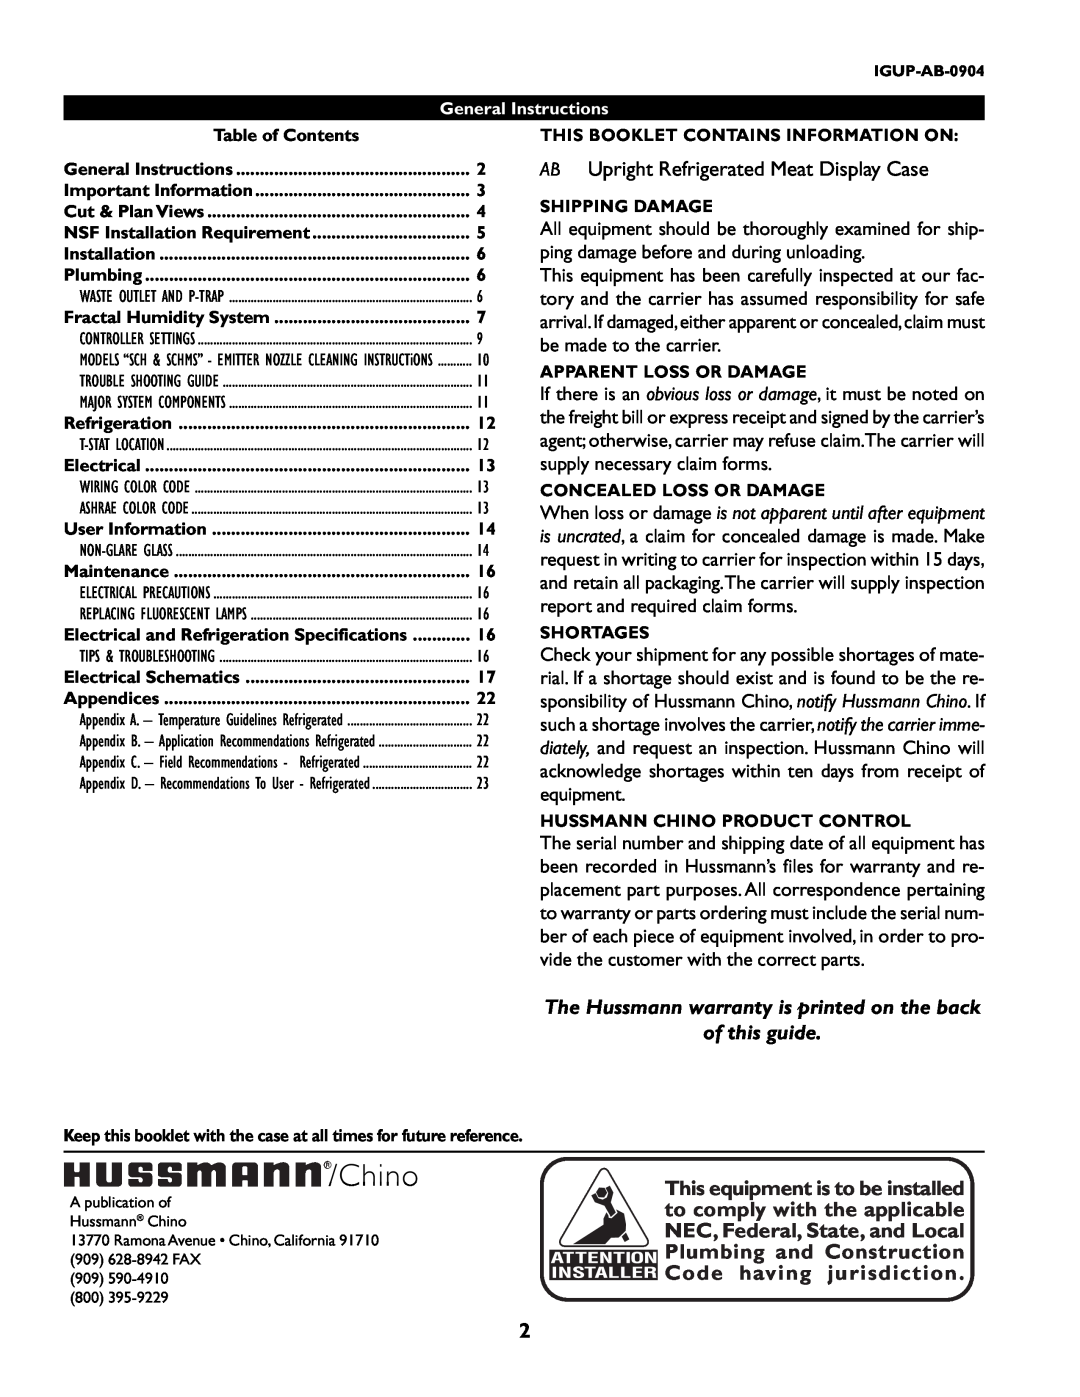 hussman P/N IGUP-AB-0904 operation manual The Hussmann warranty is printed on the back, of this guide, Chino 